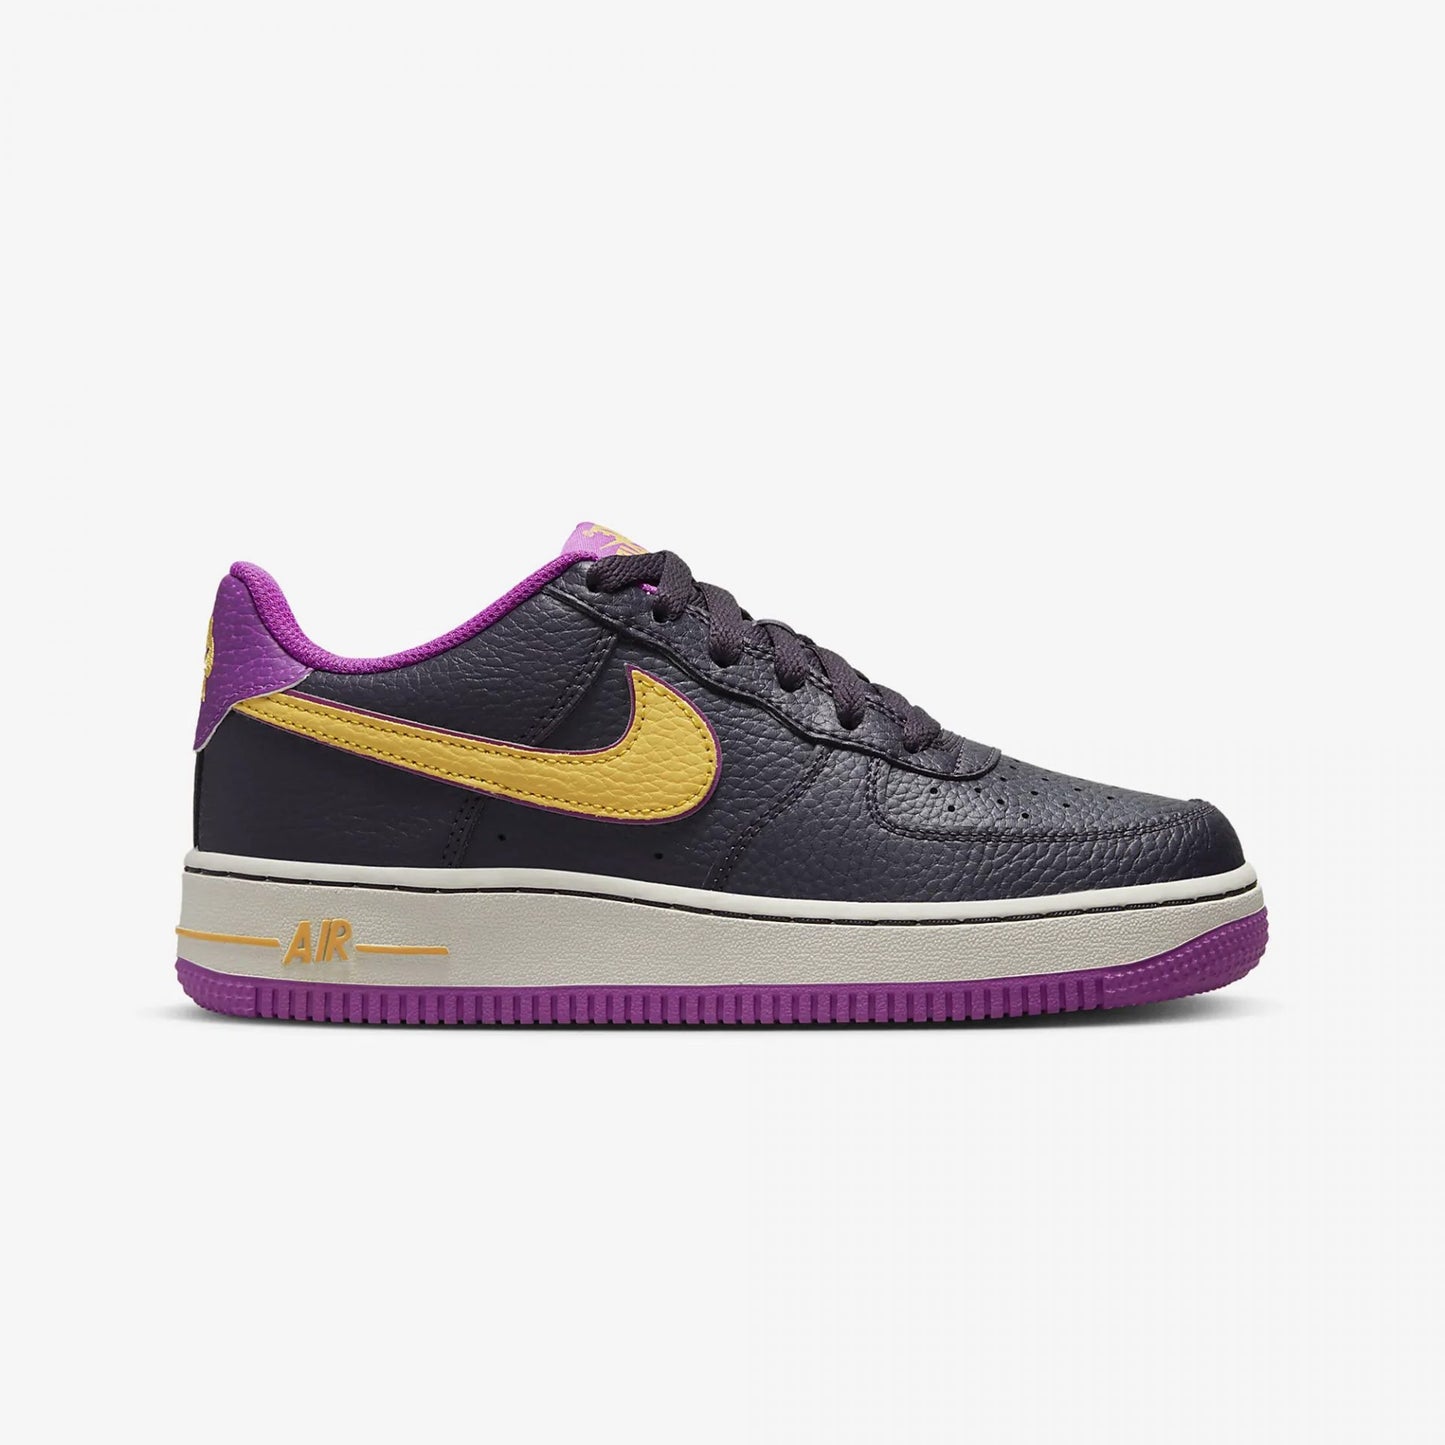 AIR FORCE 1 'CAVE PURPLE/SOLAR FLARE' (GS)